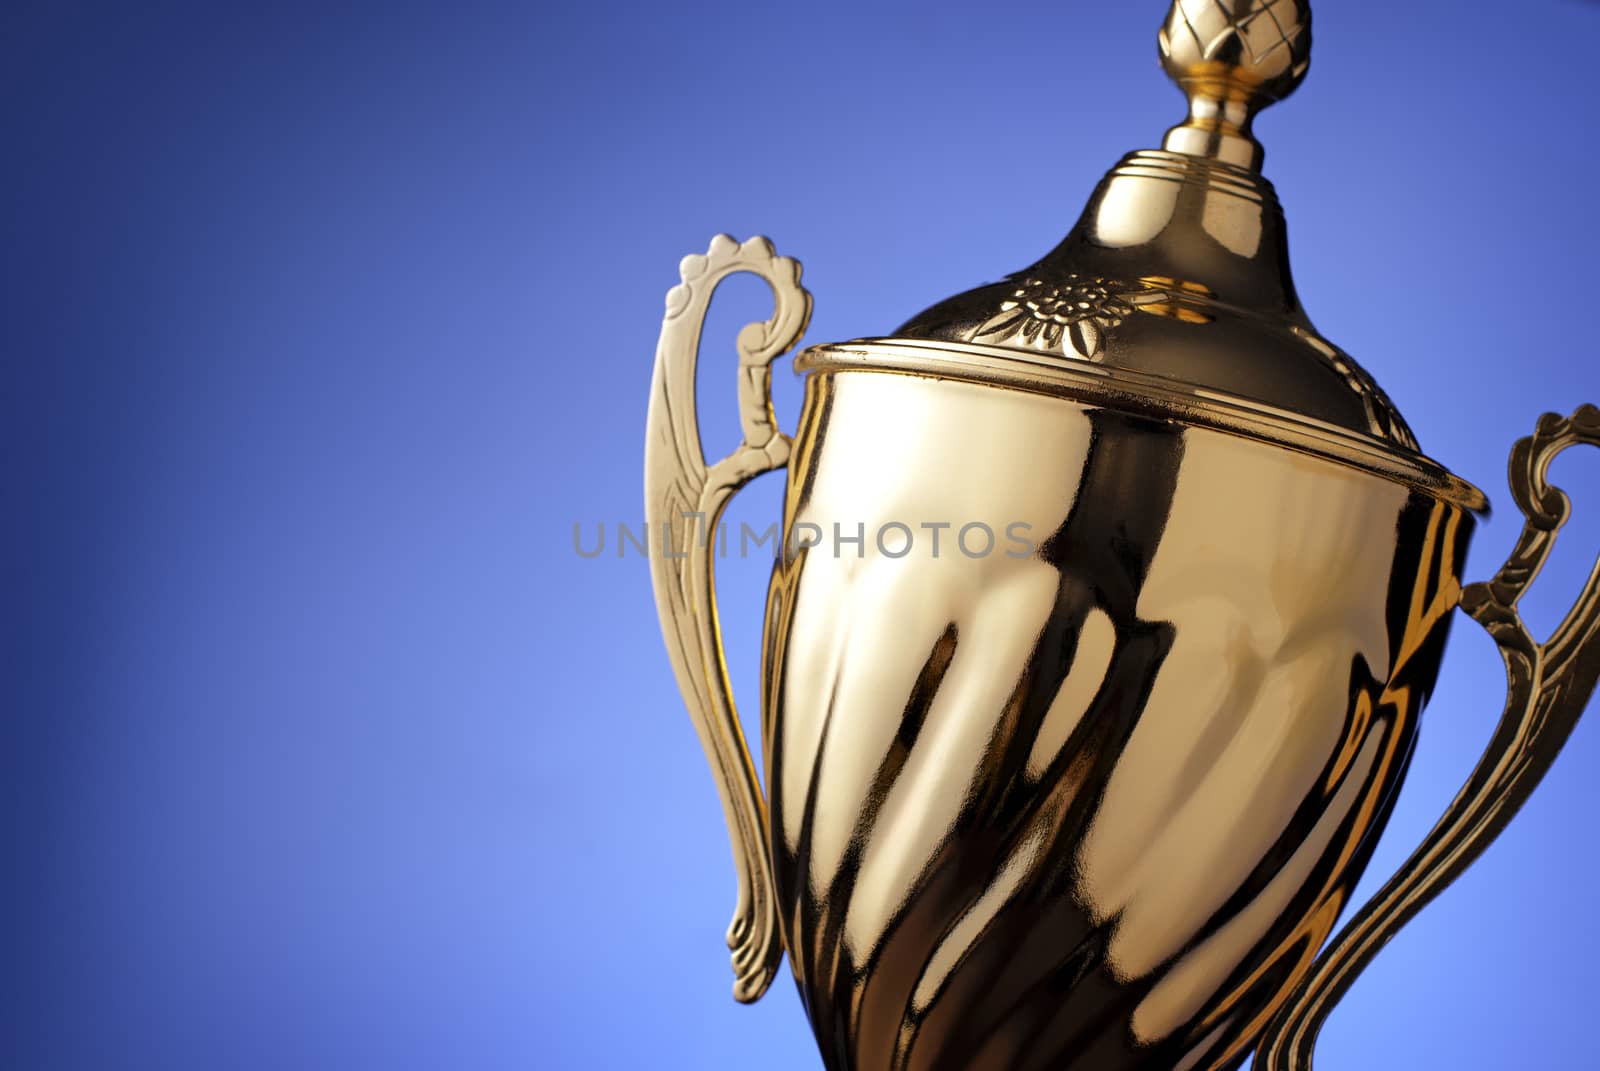 Close up of a silver trophy prize with an ornate lid and handles for the winner of a championship event or competition on blue with copyspace